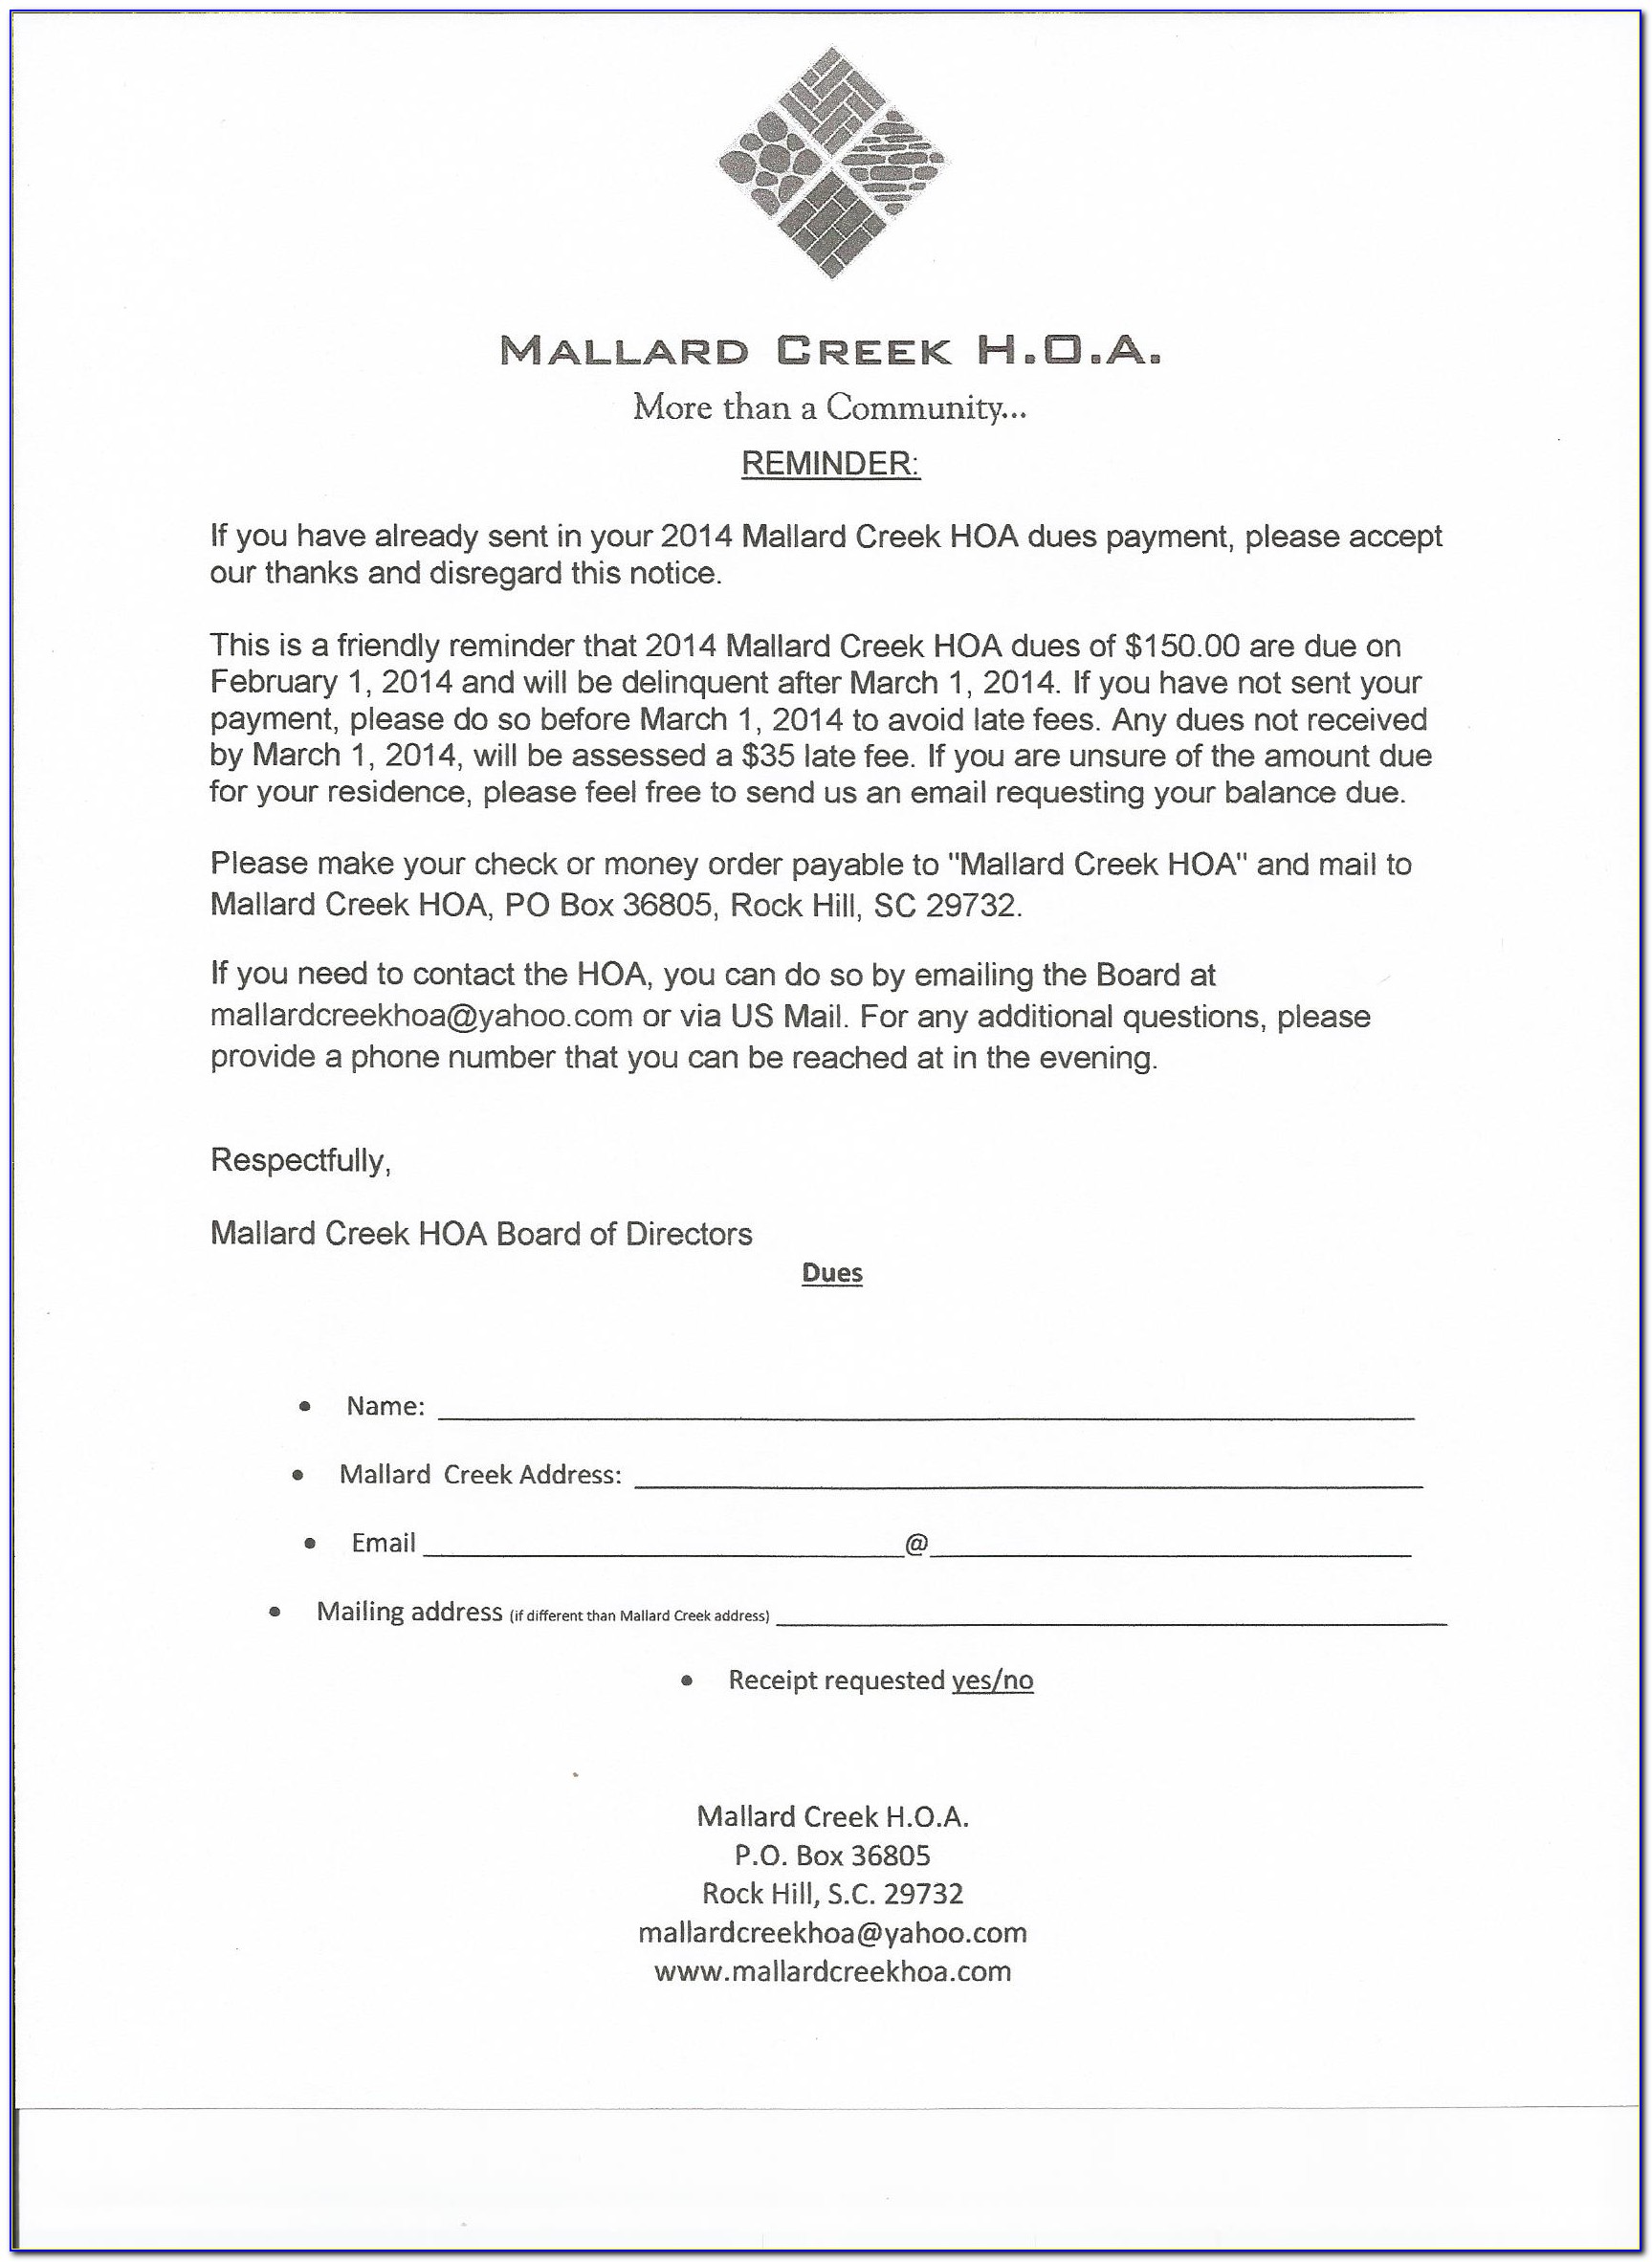 Sample Proxy Form For Homeowners' Association